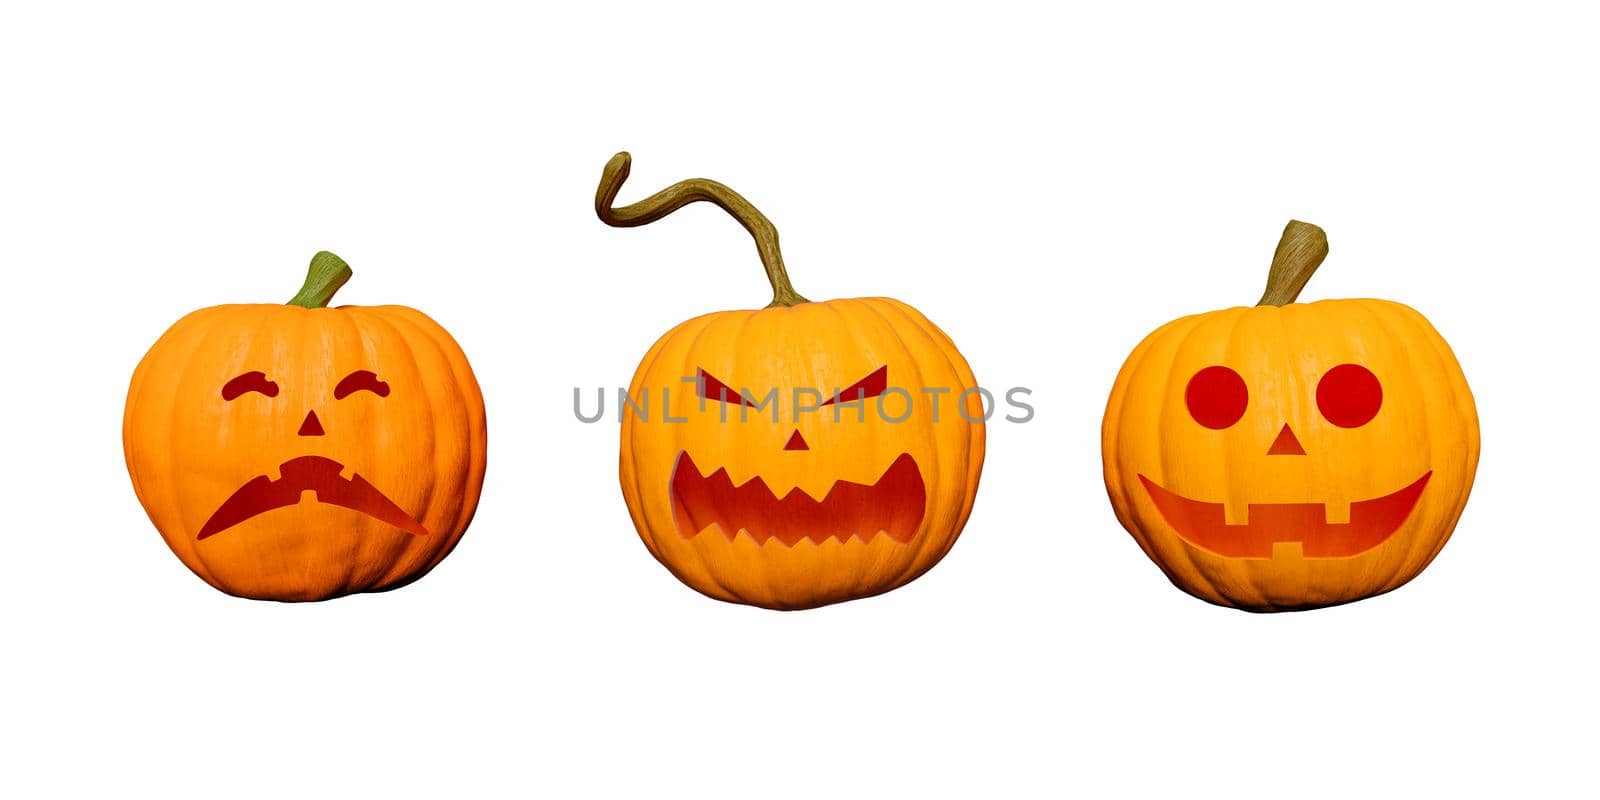 Halloween pumpkins with faces isolated on white by asolano